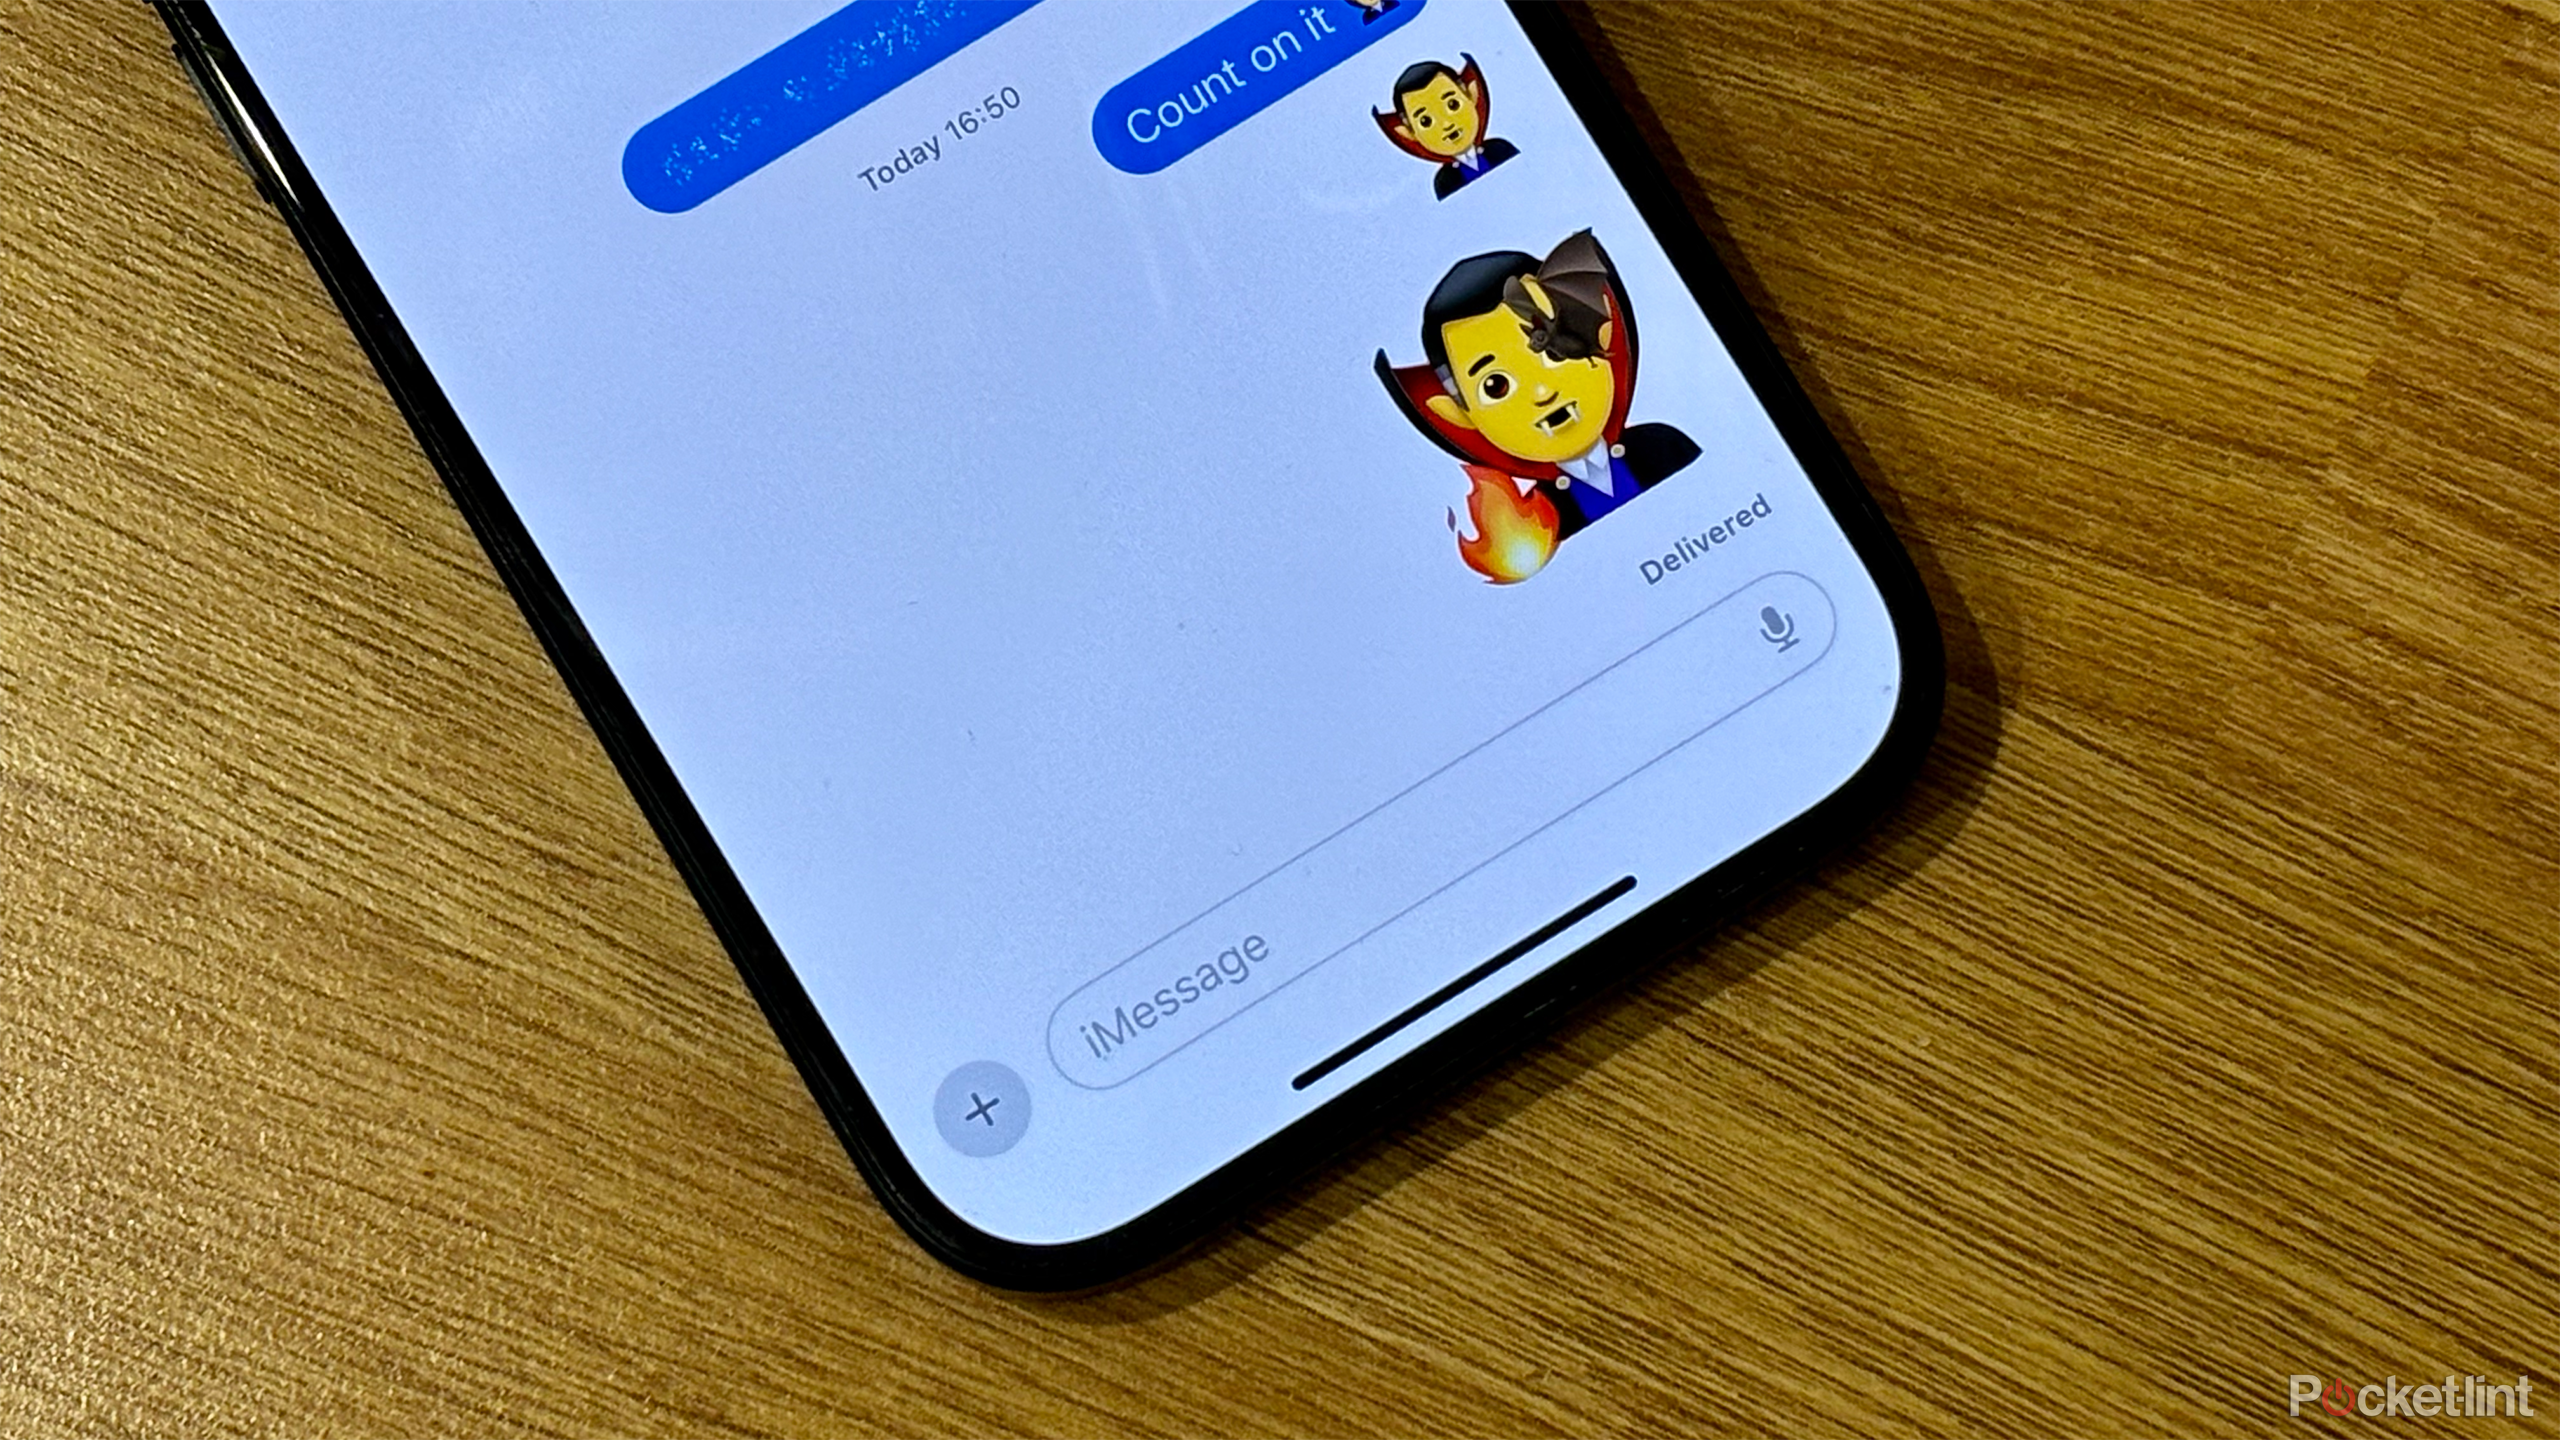 The arrival of RCS on iPhones: What to Count on